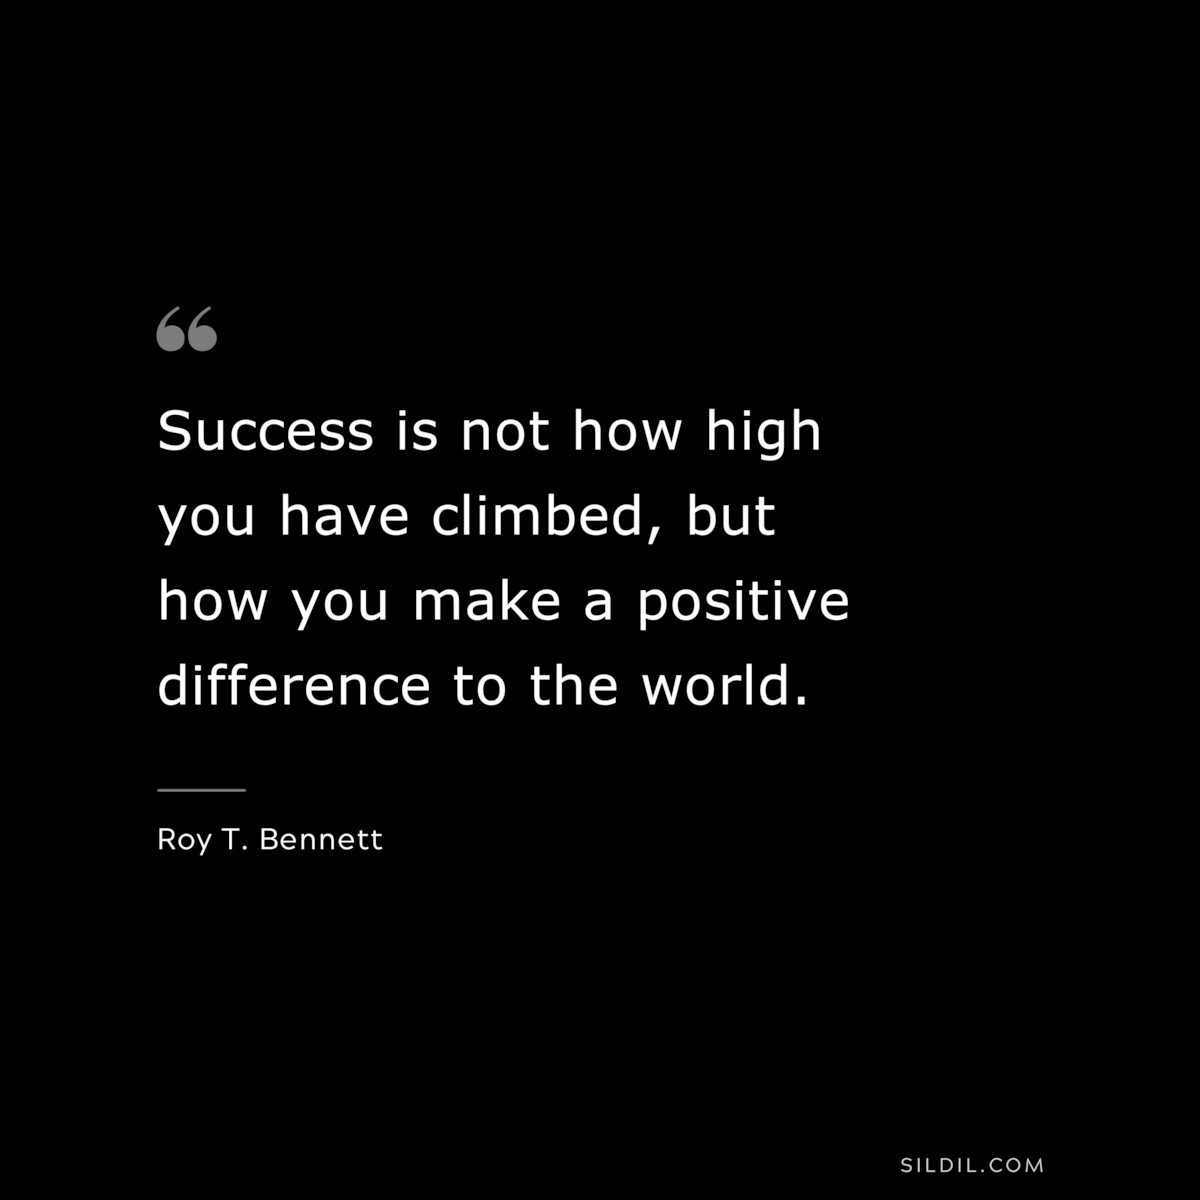 Success is not how high you have climbed, but how you make a positive difference to the world. ― Roy T. Bennett